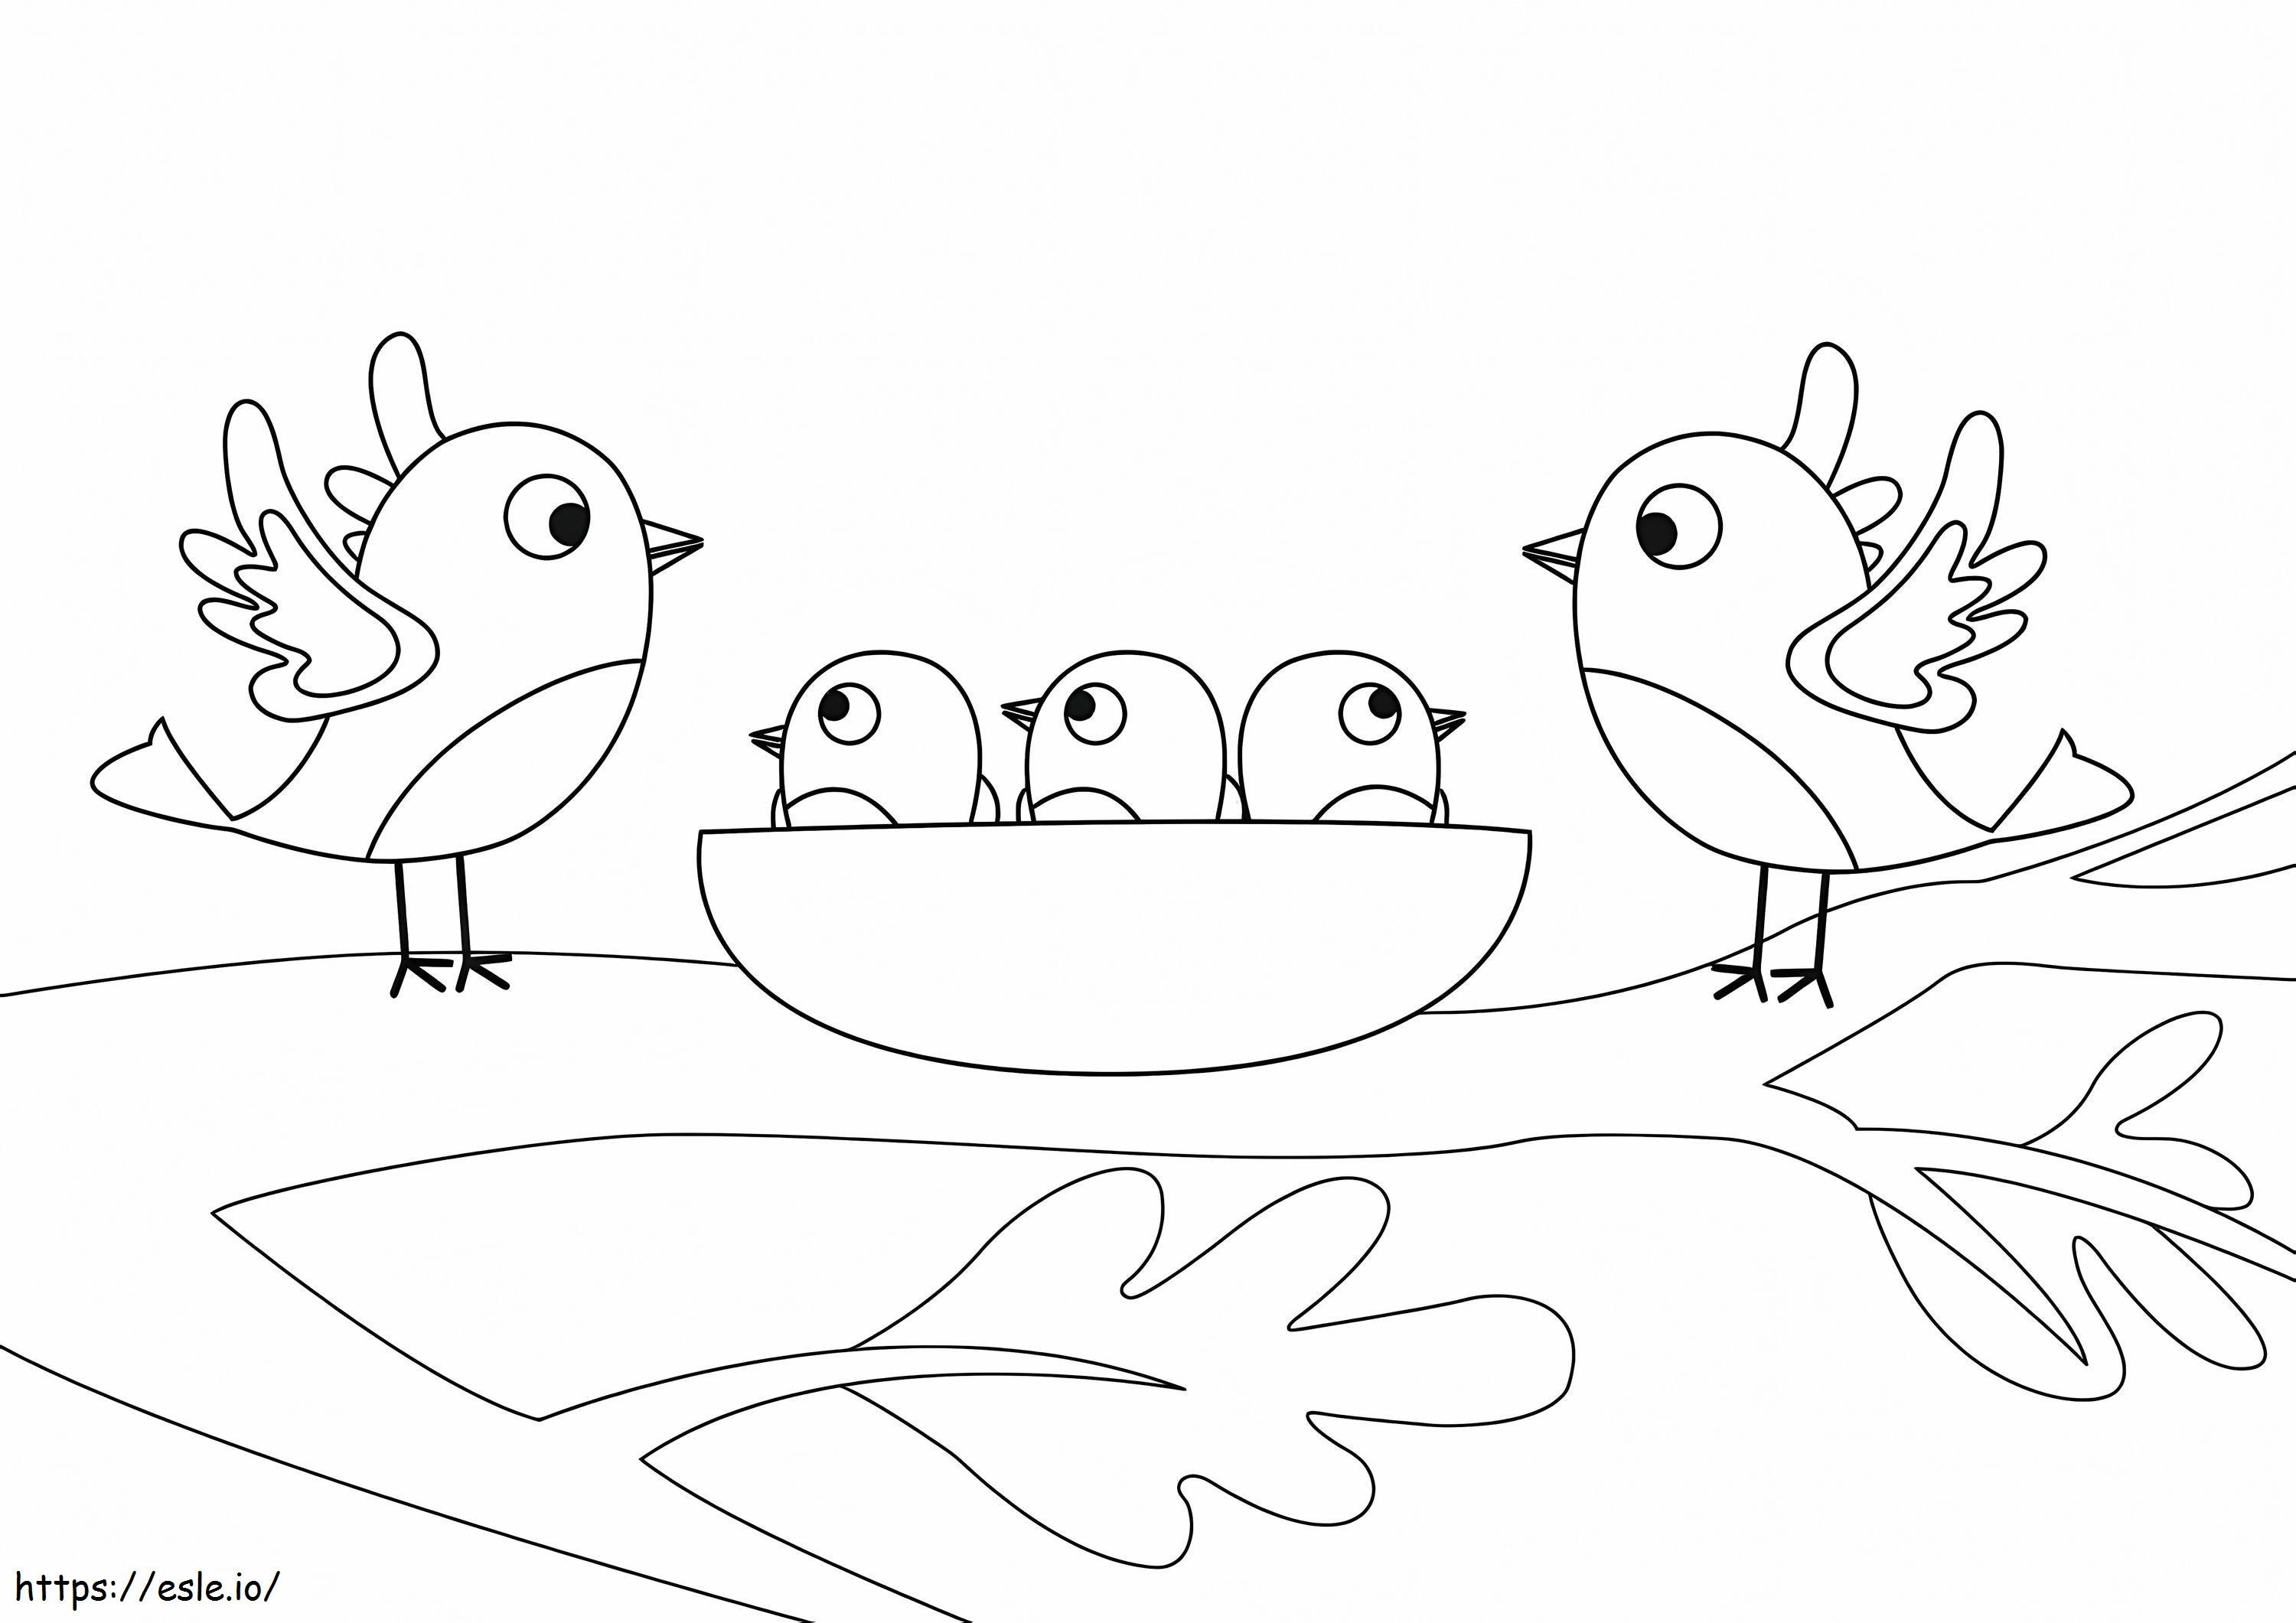 Bird Family coloring page